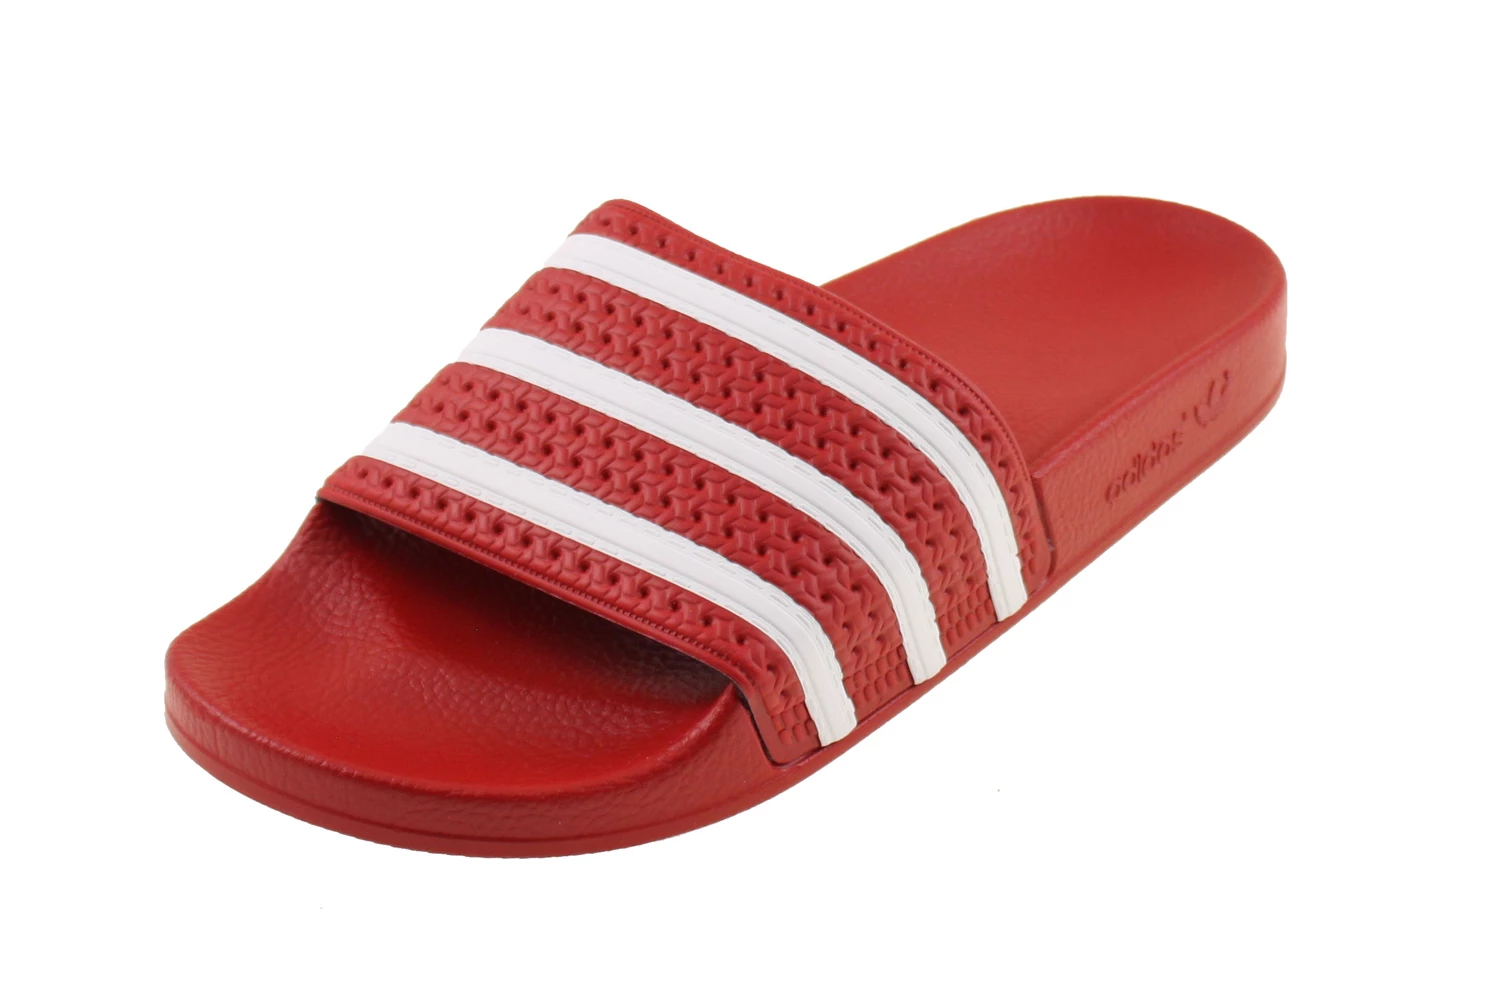 adidas badslippers dames rood> OFF-53%